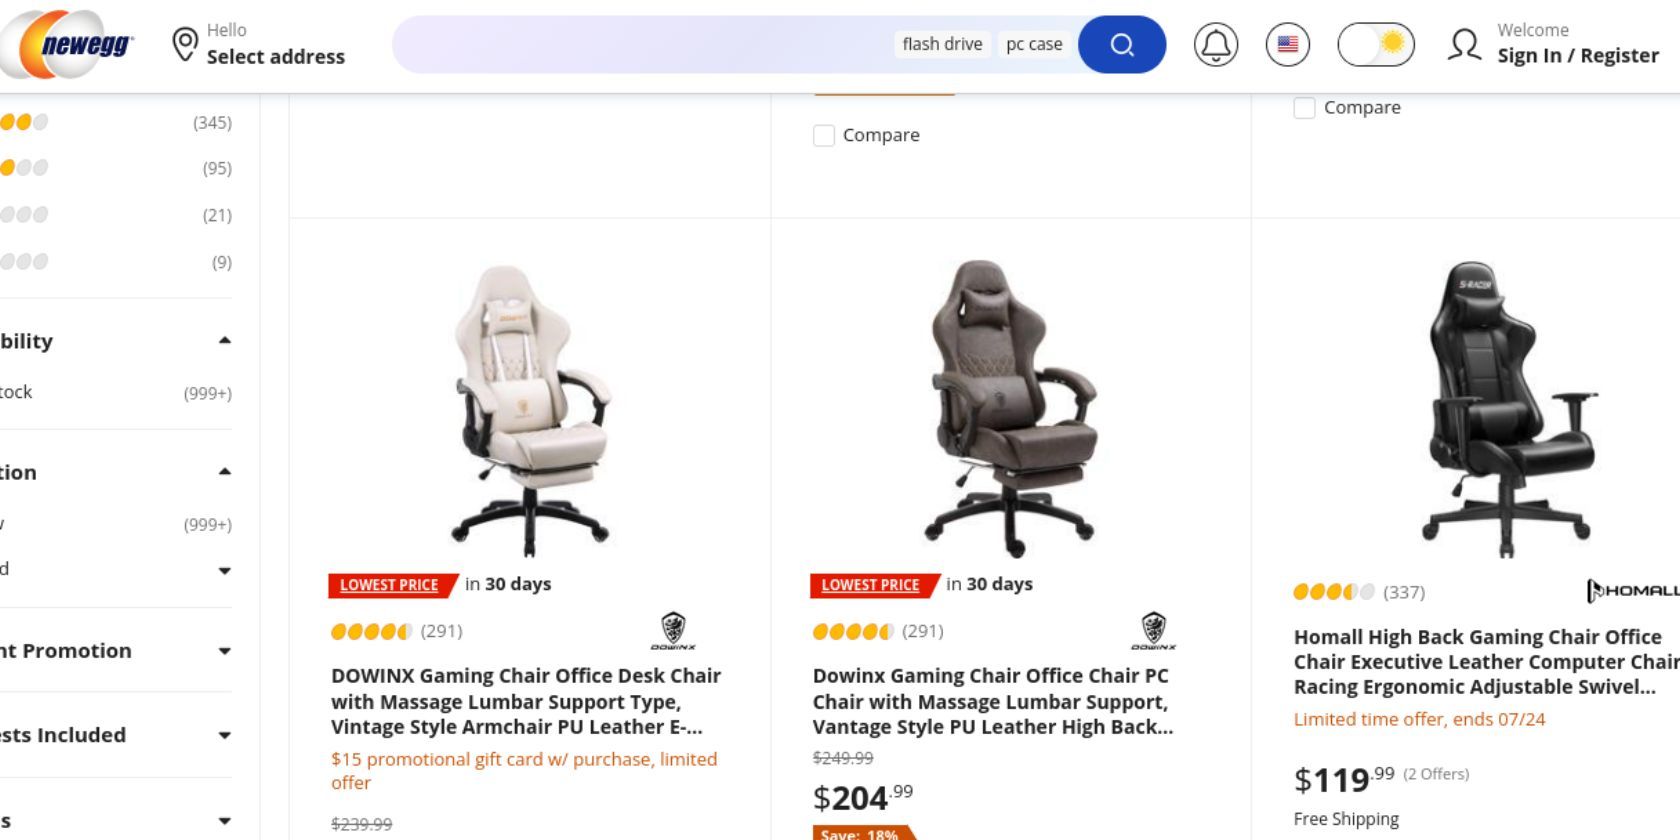 Gaming chair products on the Newegg website